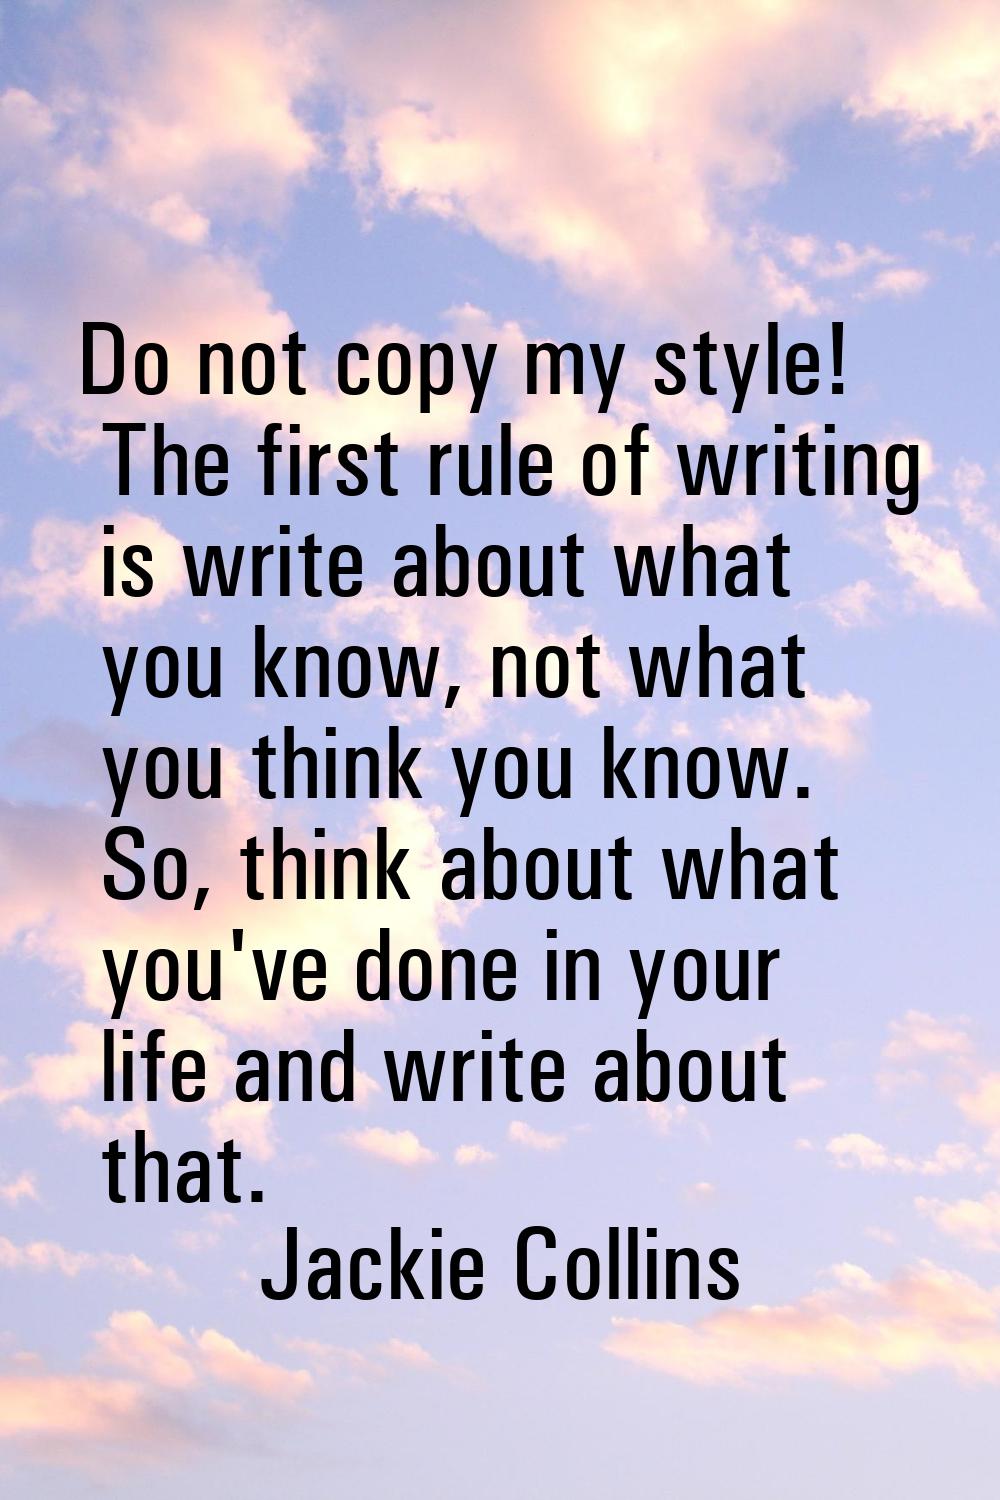 Do not copy my style! The first rule of writing is write about what you know, not what you think yo